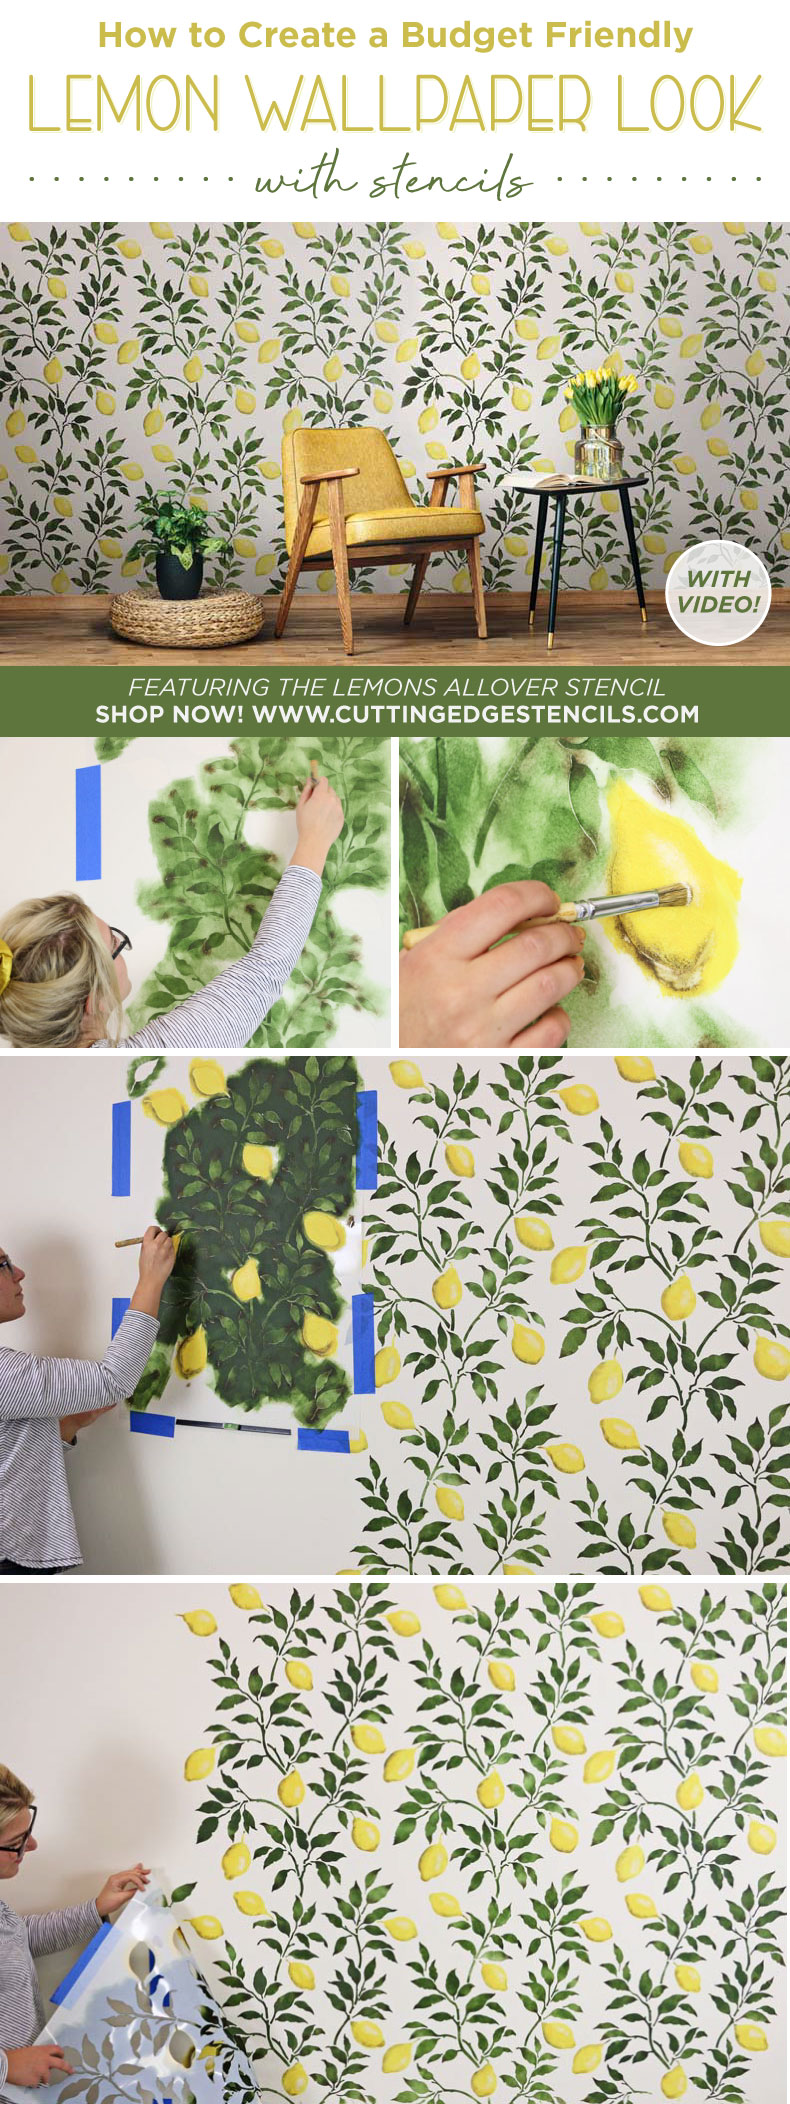 How to Create a Budget Friendly Lemon Wallpaper Look with Stencils